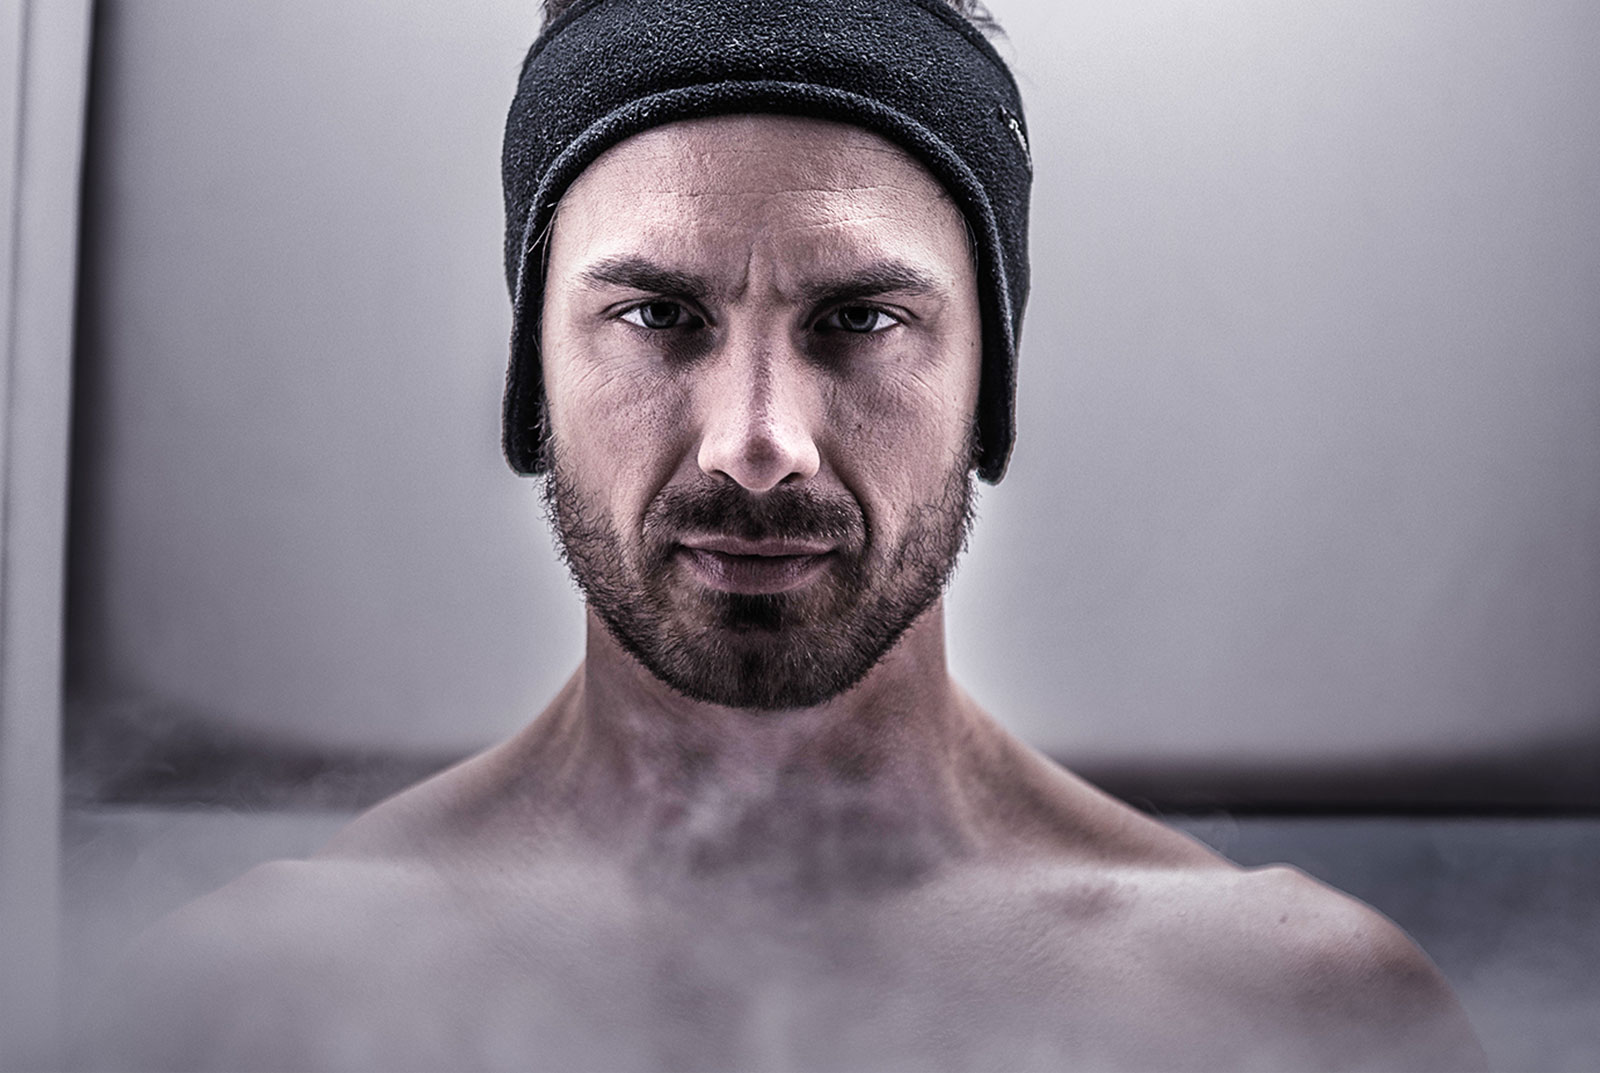 Melbourne's Leading Cryotherapy Studi